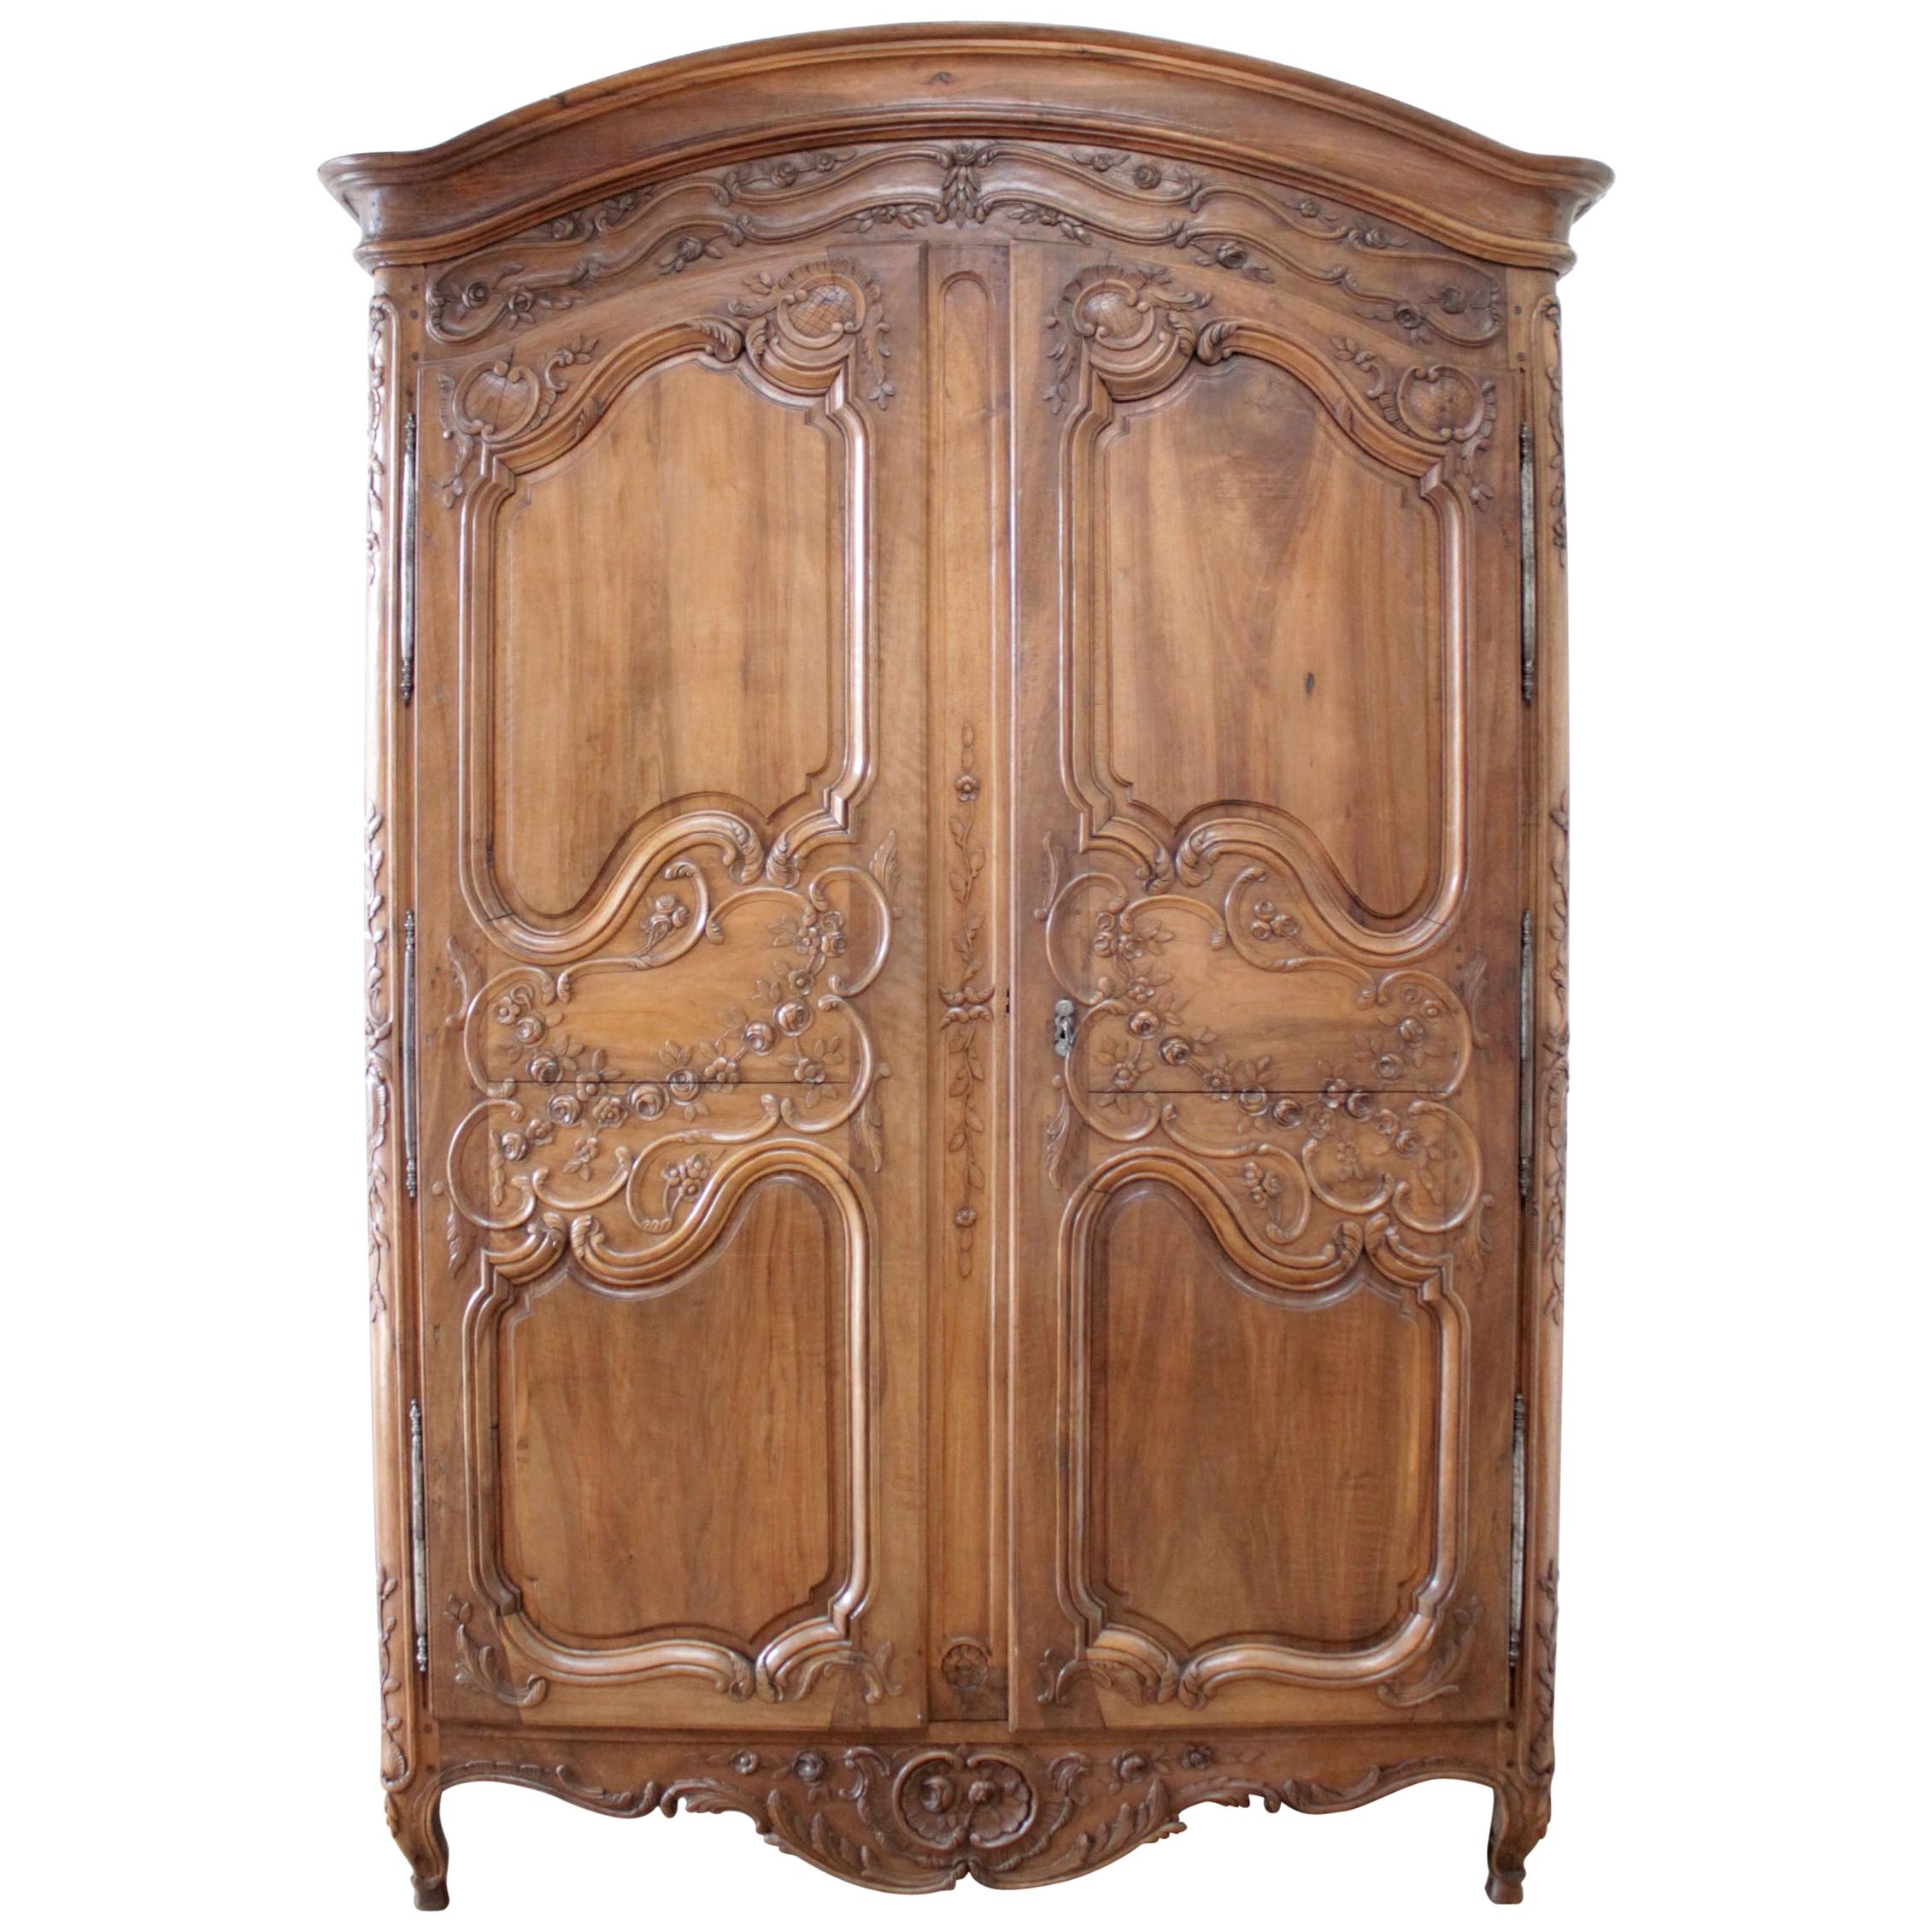 Antique European French Provincial Carved Roses Armoire Cabinet